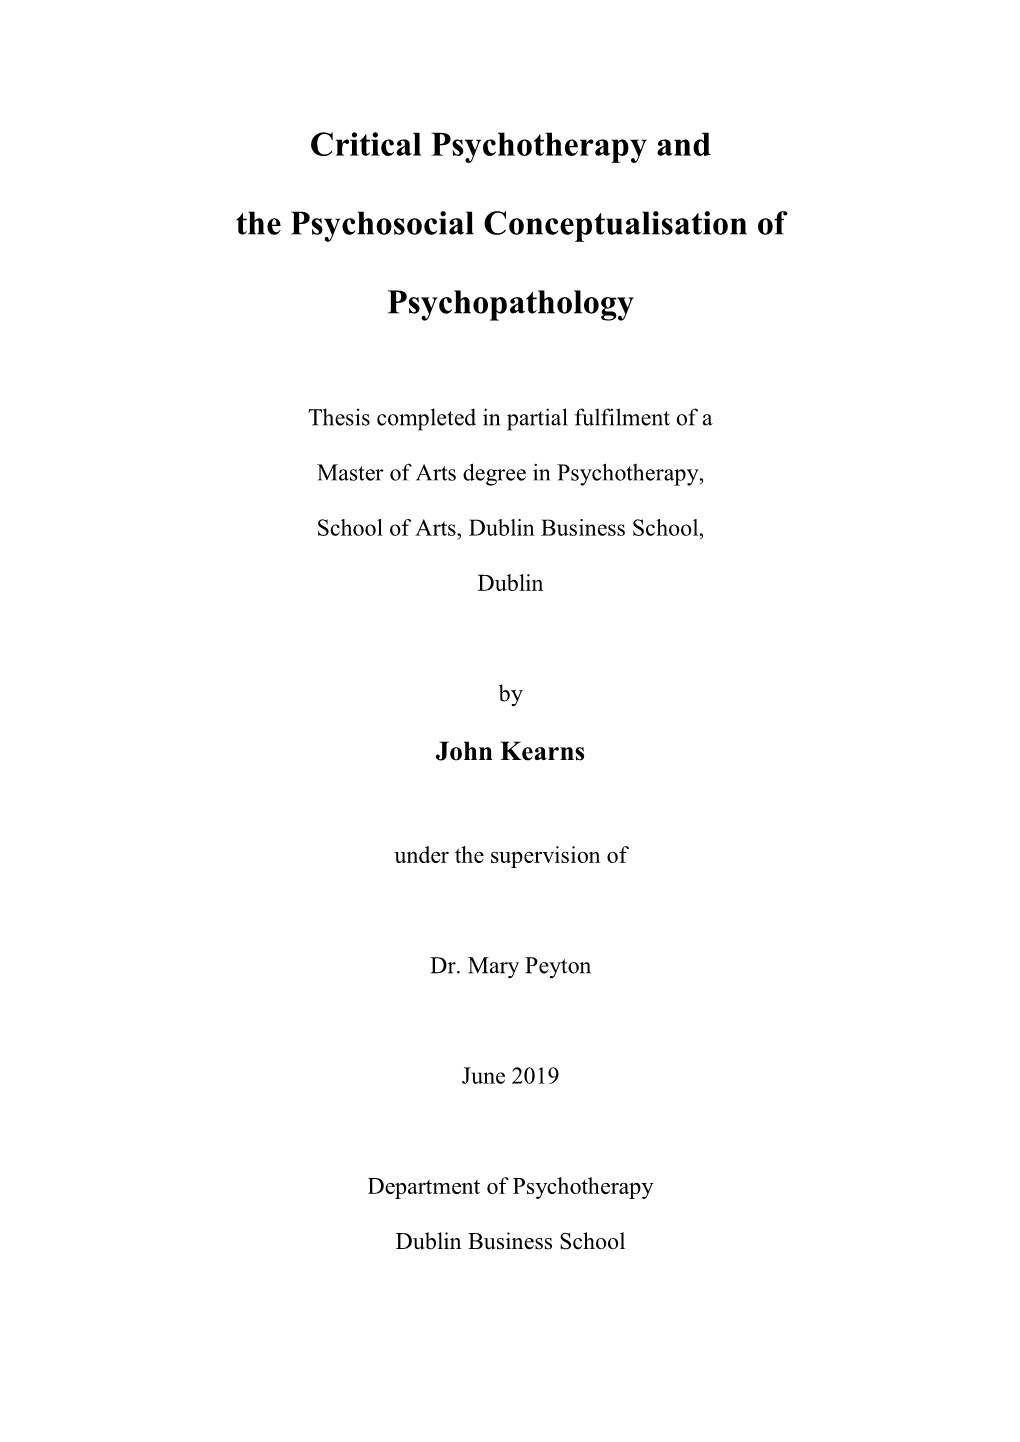 Critical Psychotherapy and the Psychosocial Conceptualisation Of